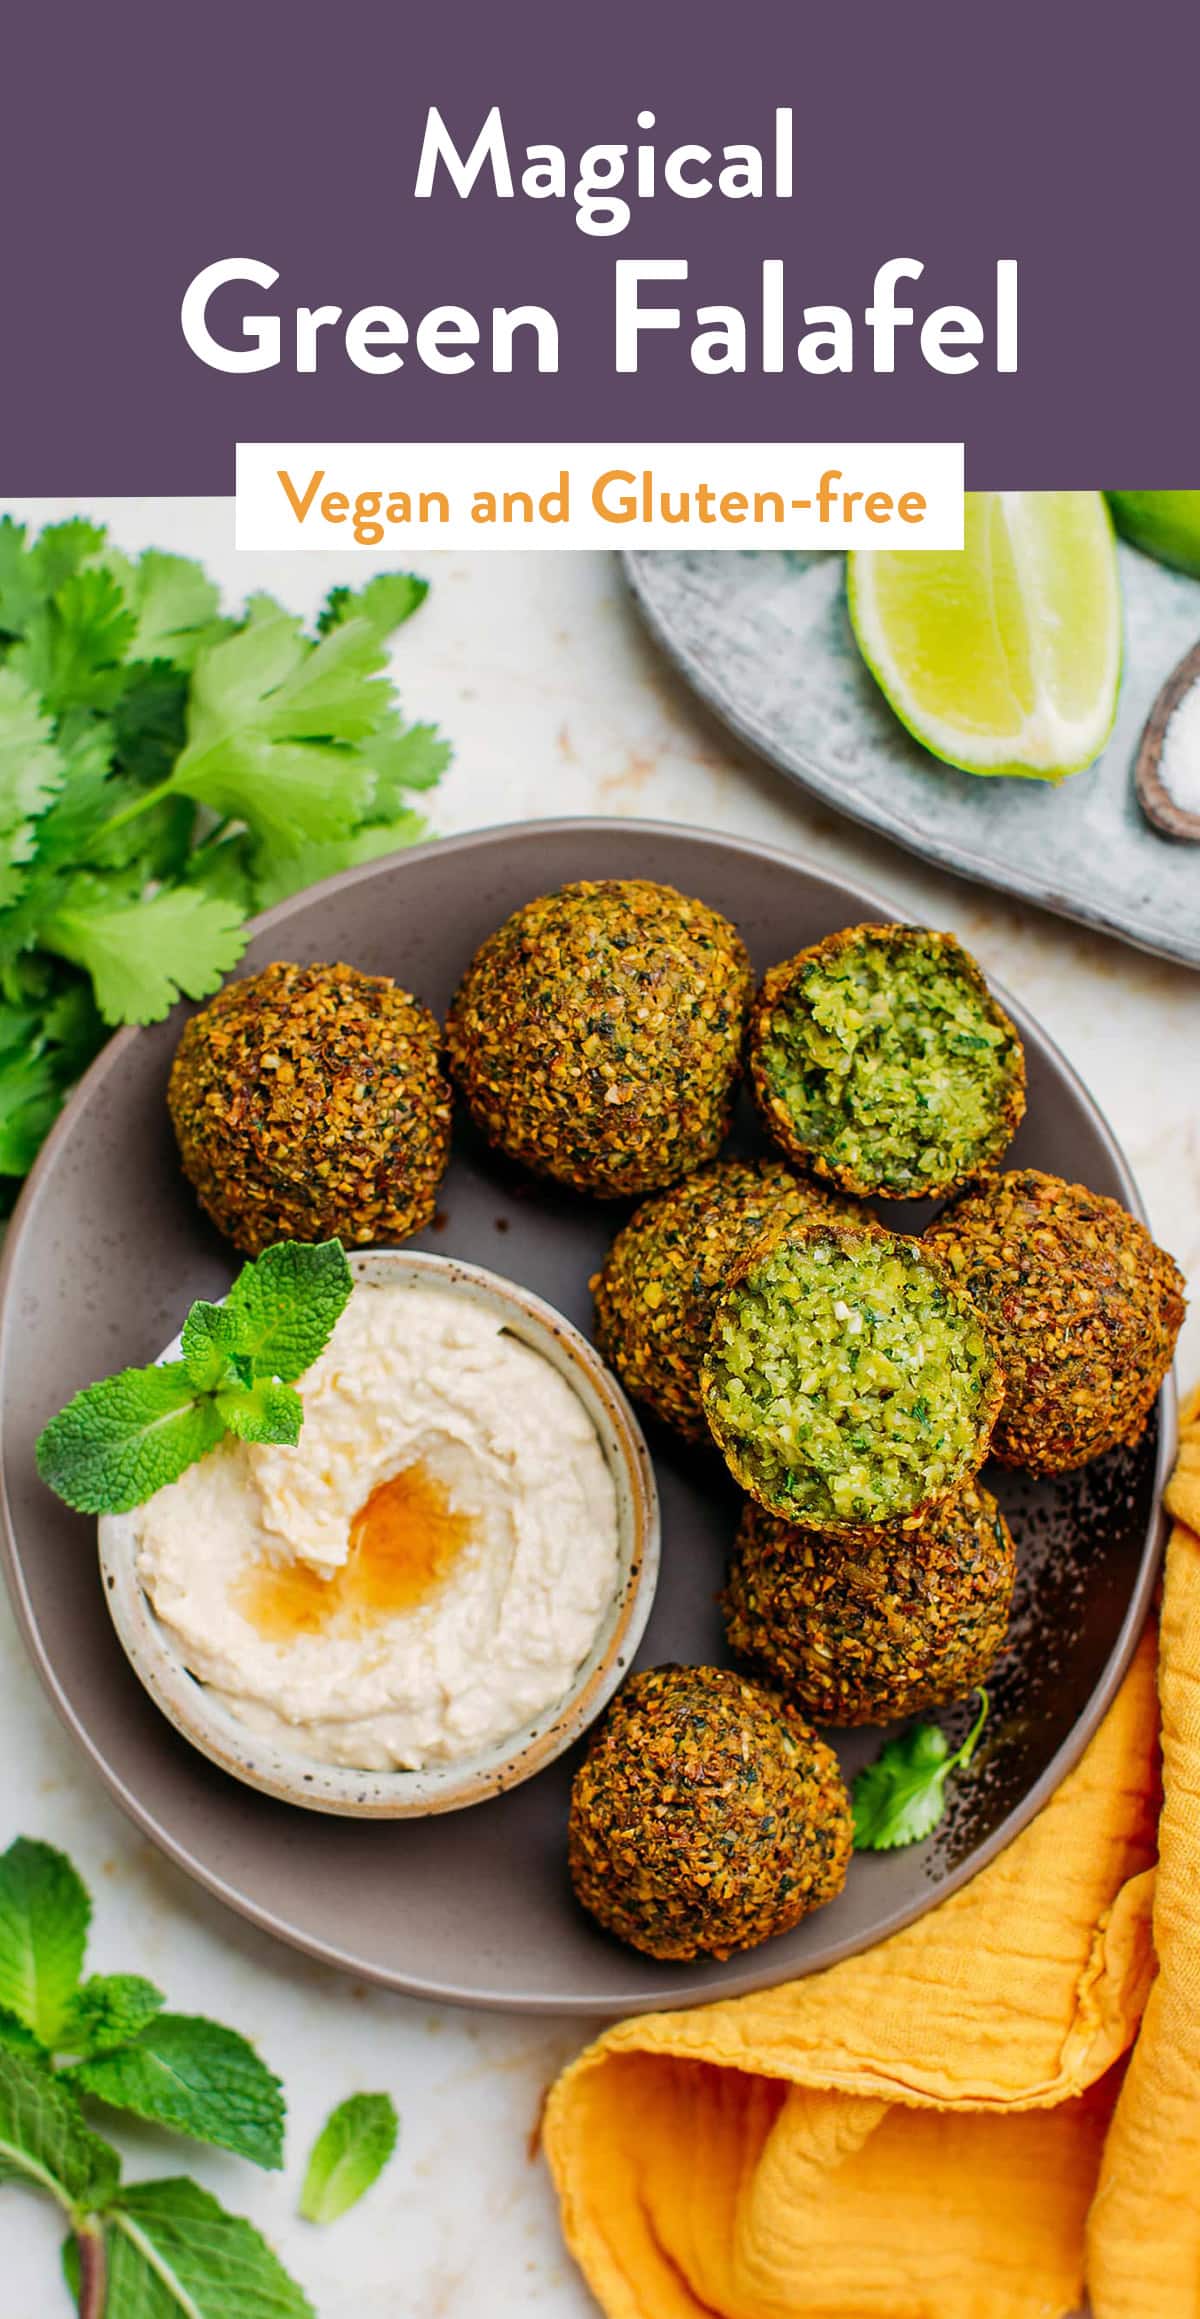 This Middle Eastern-inspired falafel is moist and fluffy on the inside, super crispy on the outside, and packs a ton of fresh herbs! This vegan falafel is the most delicious I have ever tasted! #falafel #vegan #lebanese